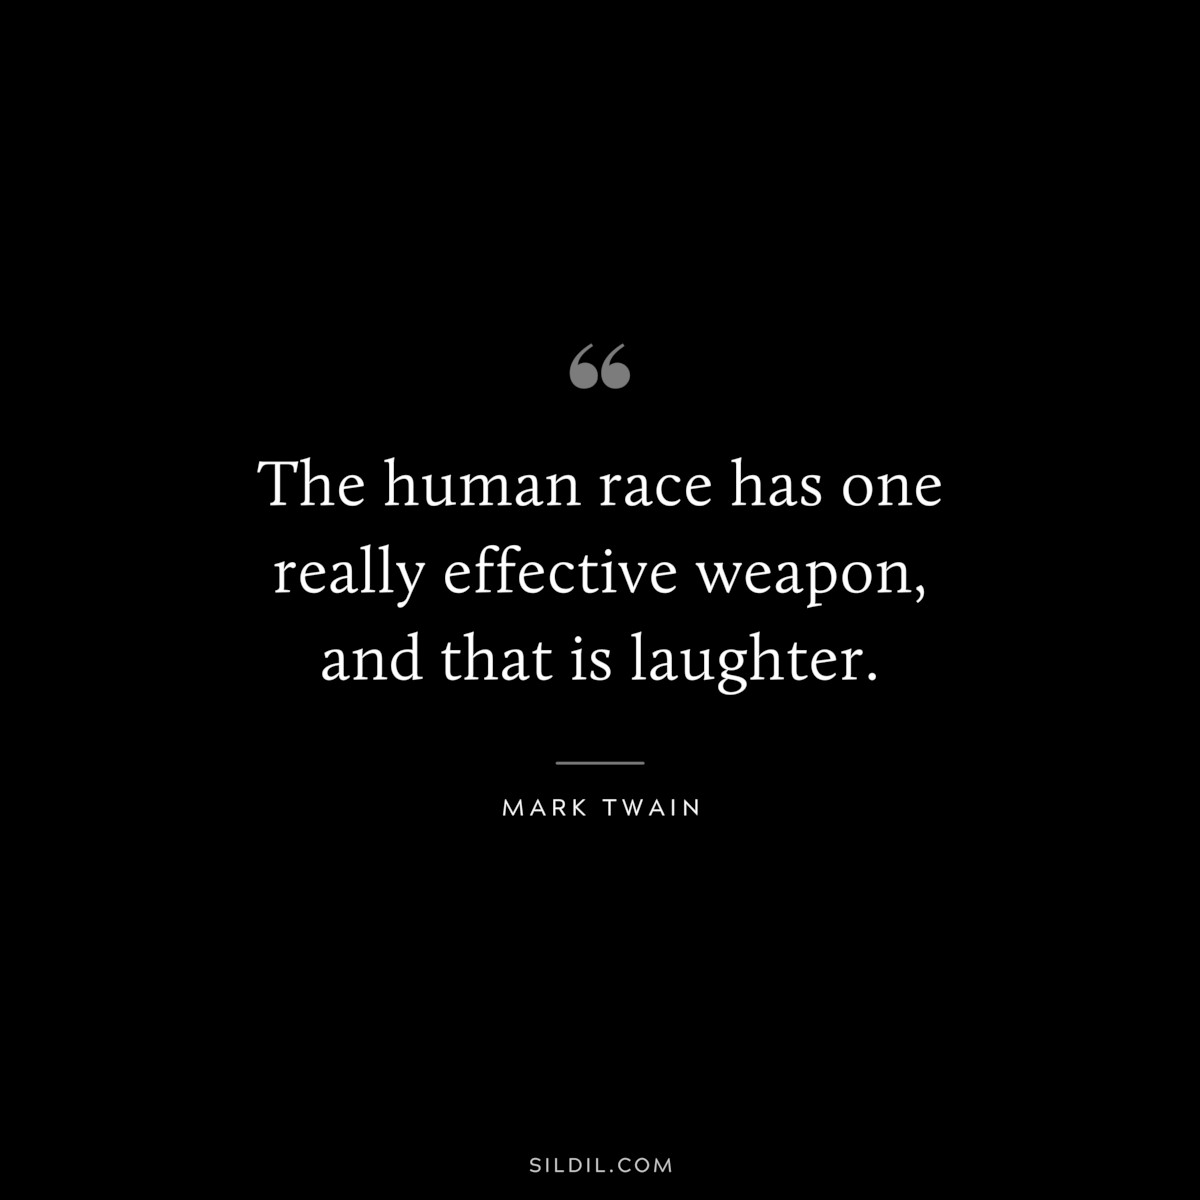 The human race has one really effective weapon, and that is laughter. ― Mark Twain